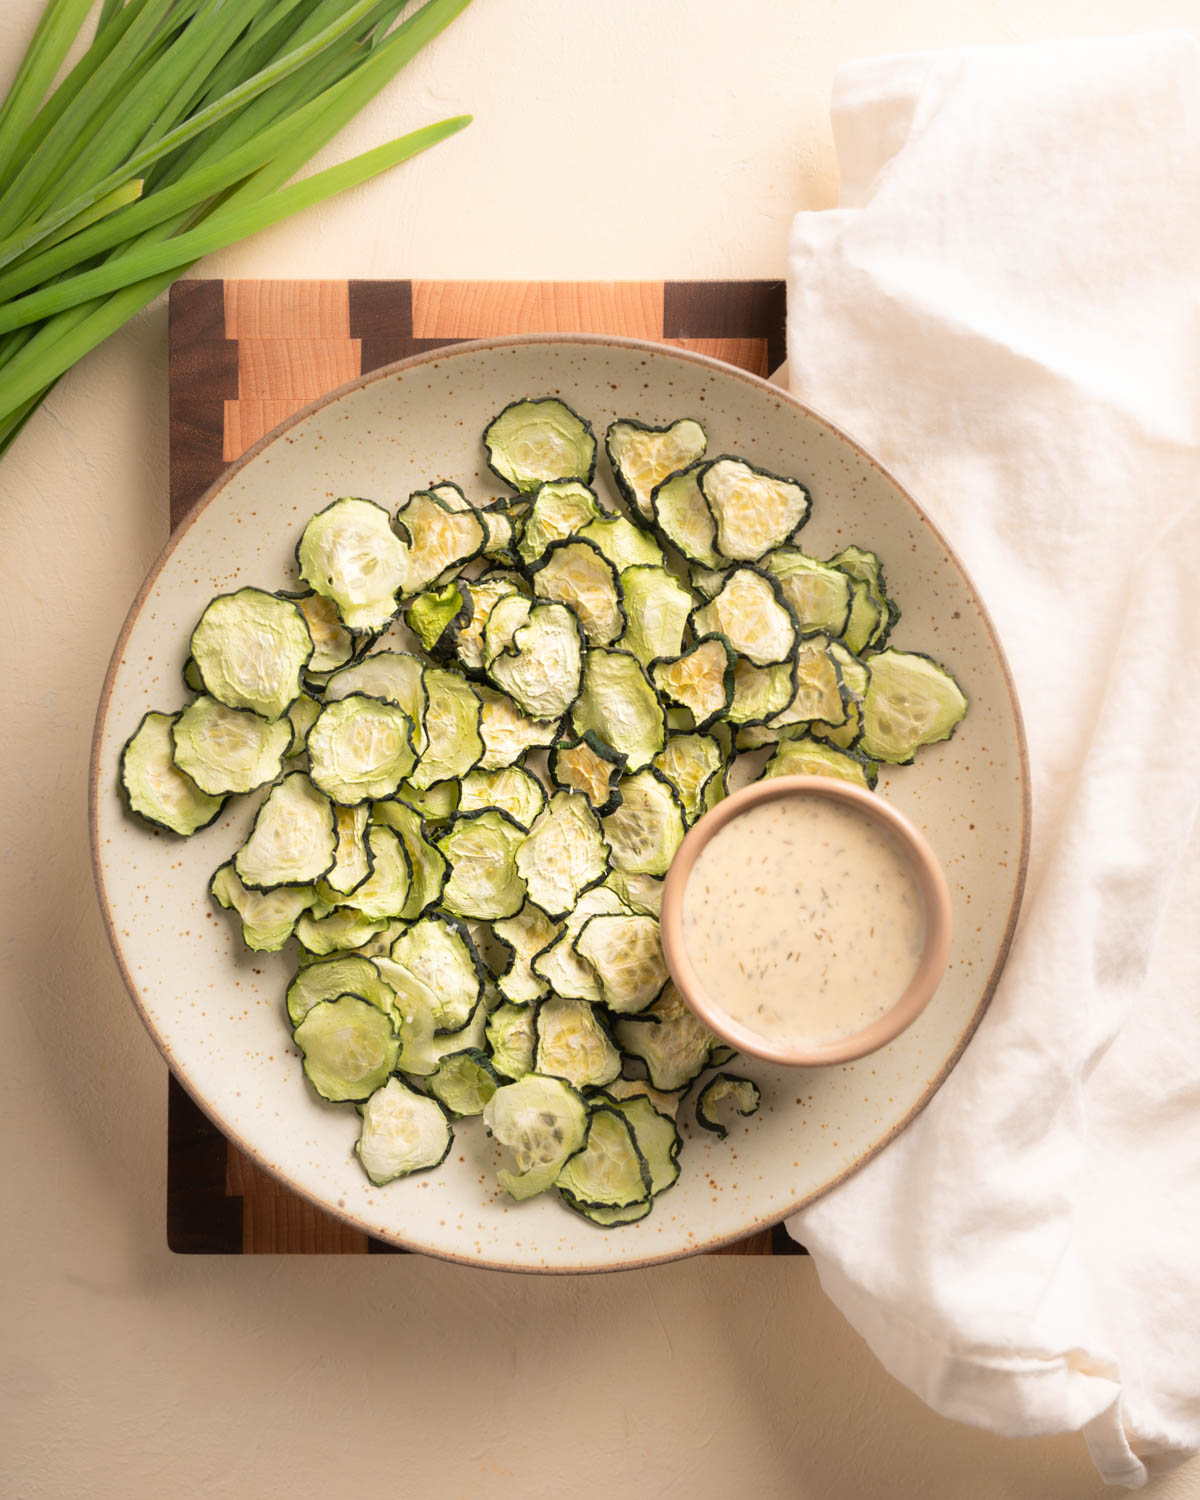 A plate of dehydrate cucumbers (cucumber chips) surround with a linin napkin, a bowl of ranch, and some green edible prop to the side. The plate is sitting on top of a two toned board.